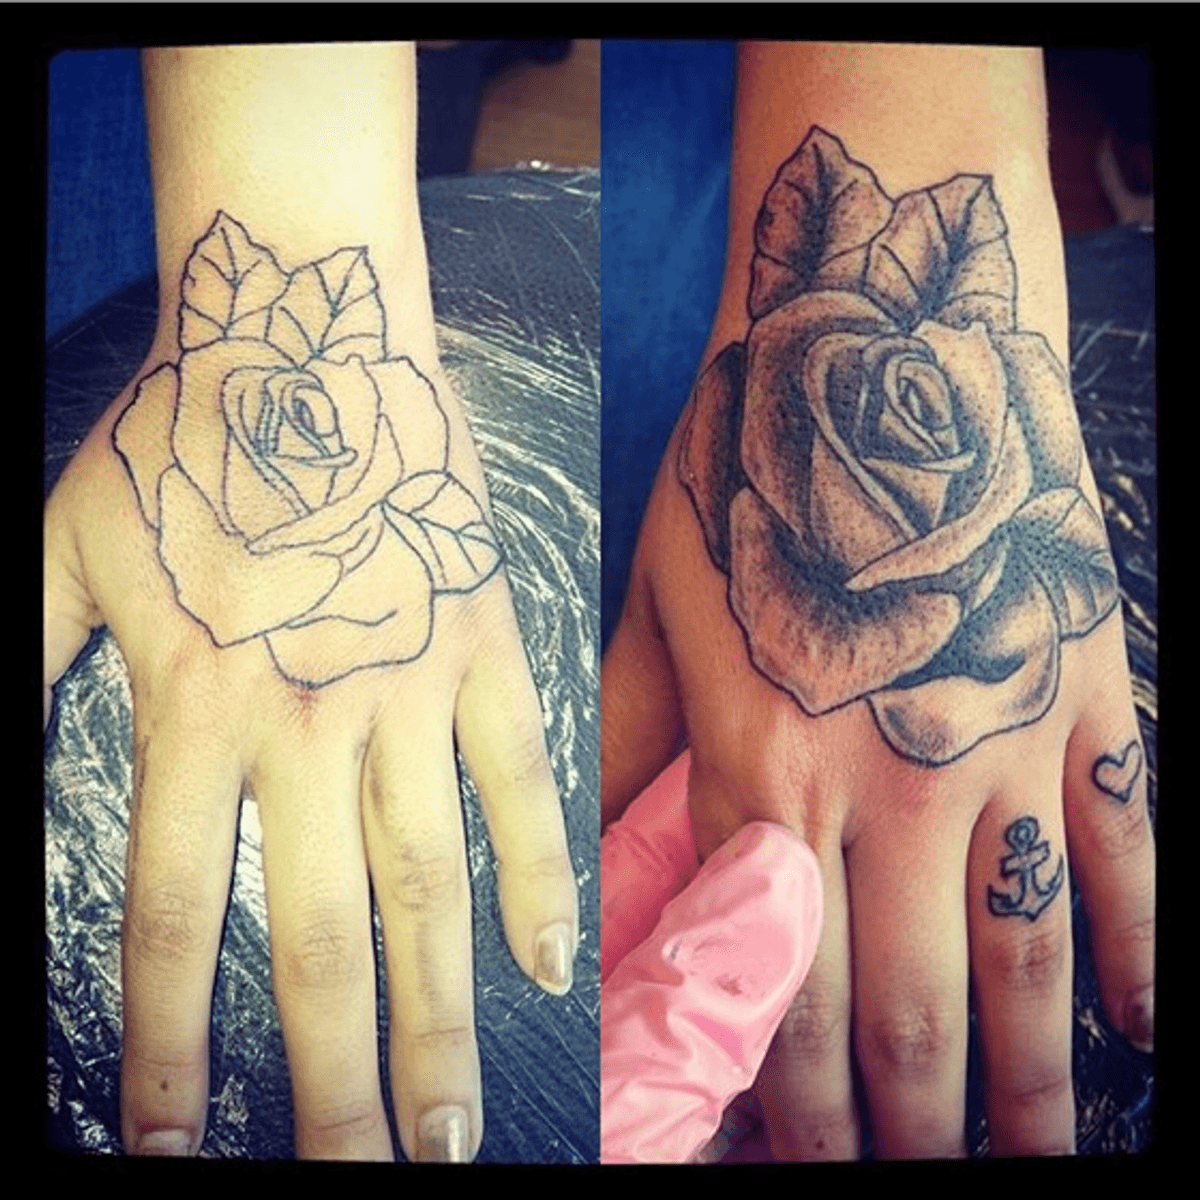 Tattoo Uploaded By Eloise Harad • A Hand Rose Tattoo And Anchor And Heart